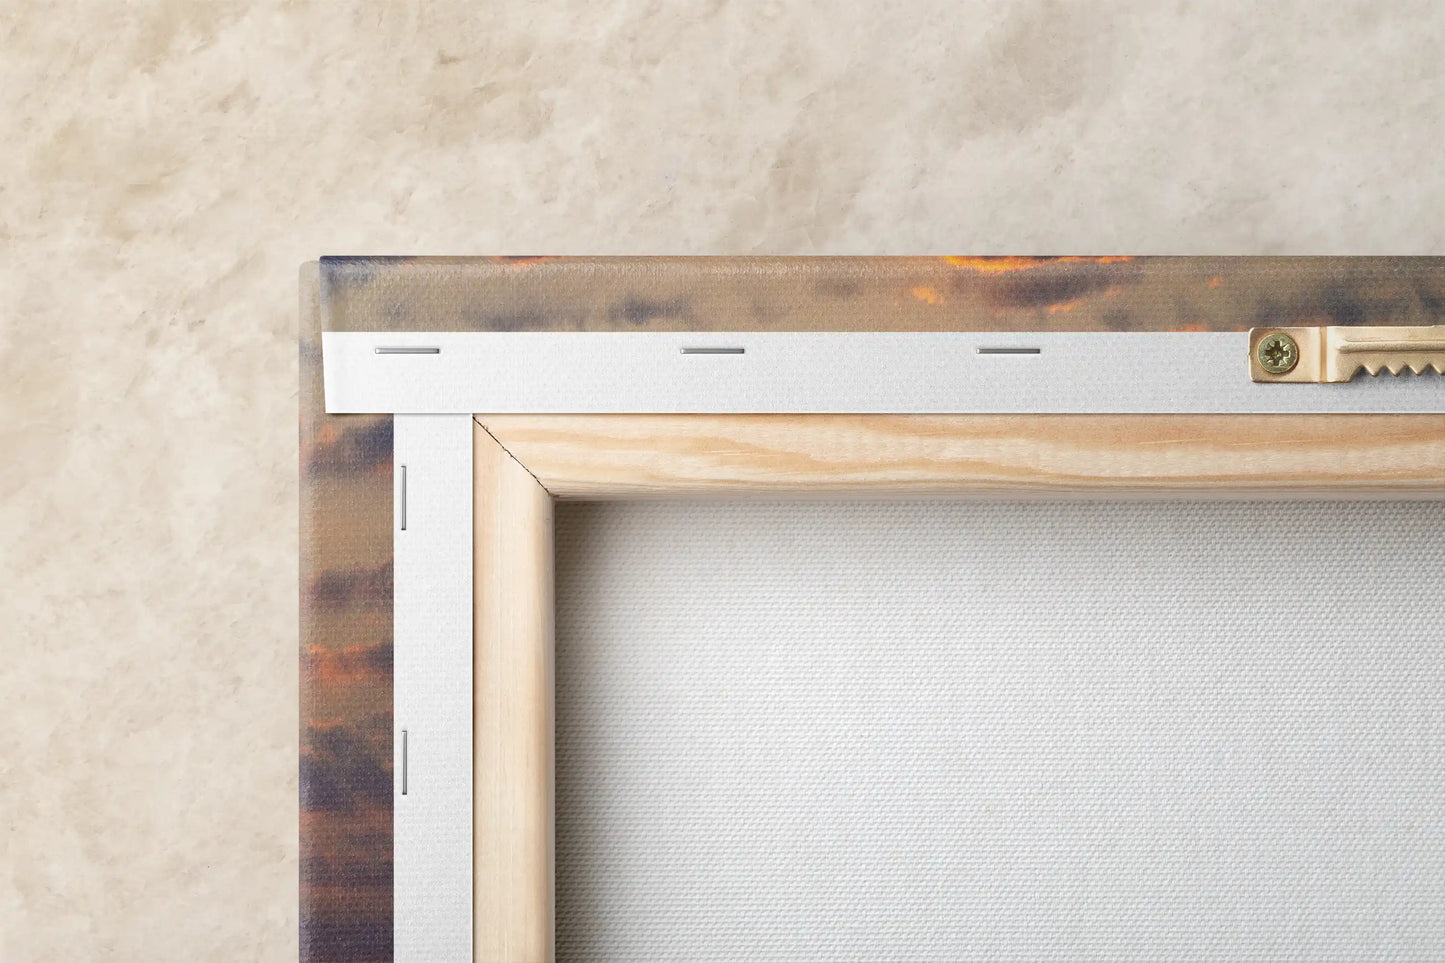 Close-up view of the back of a canvas print showing the sturdy wooden frame and metal mounting hardware against a textured backdrop.